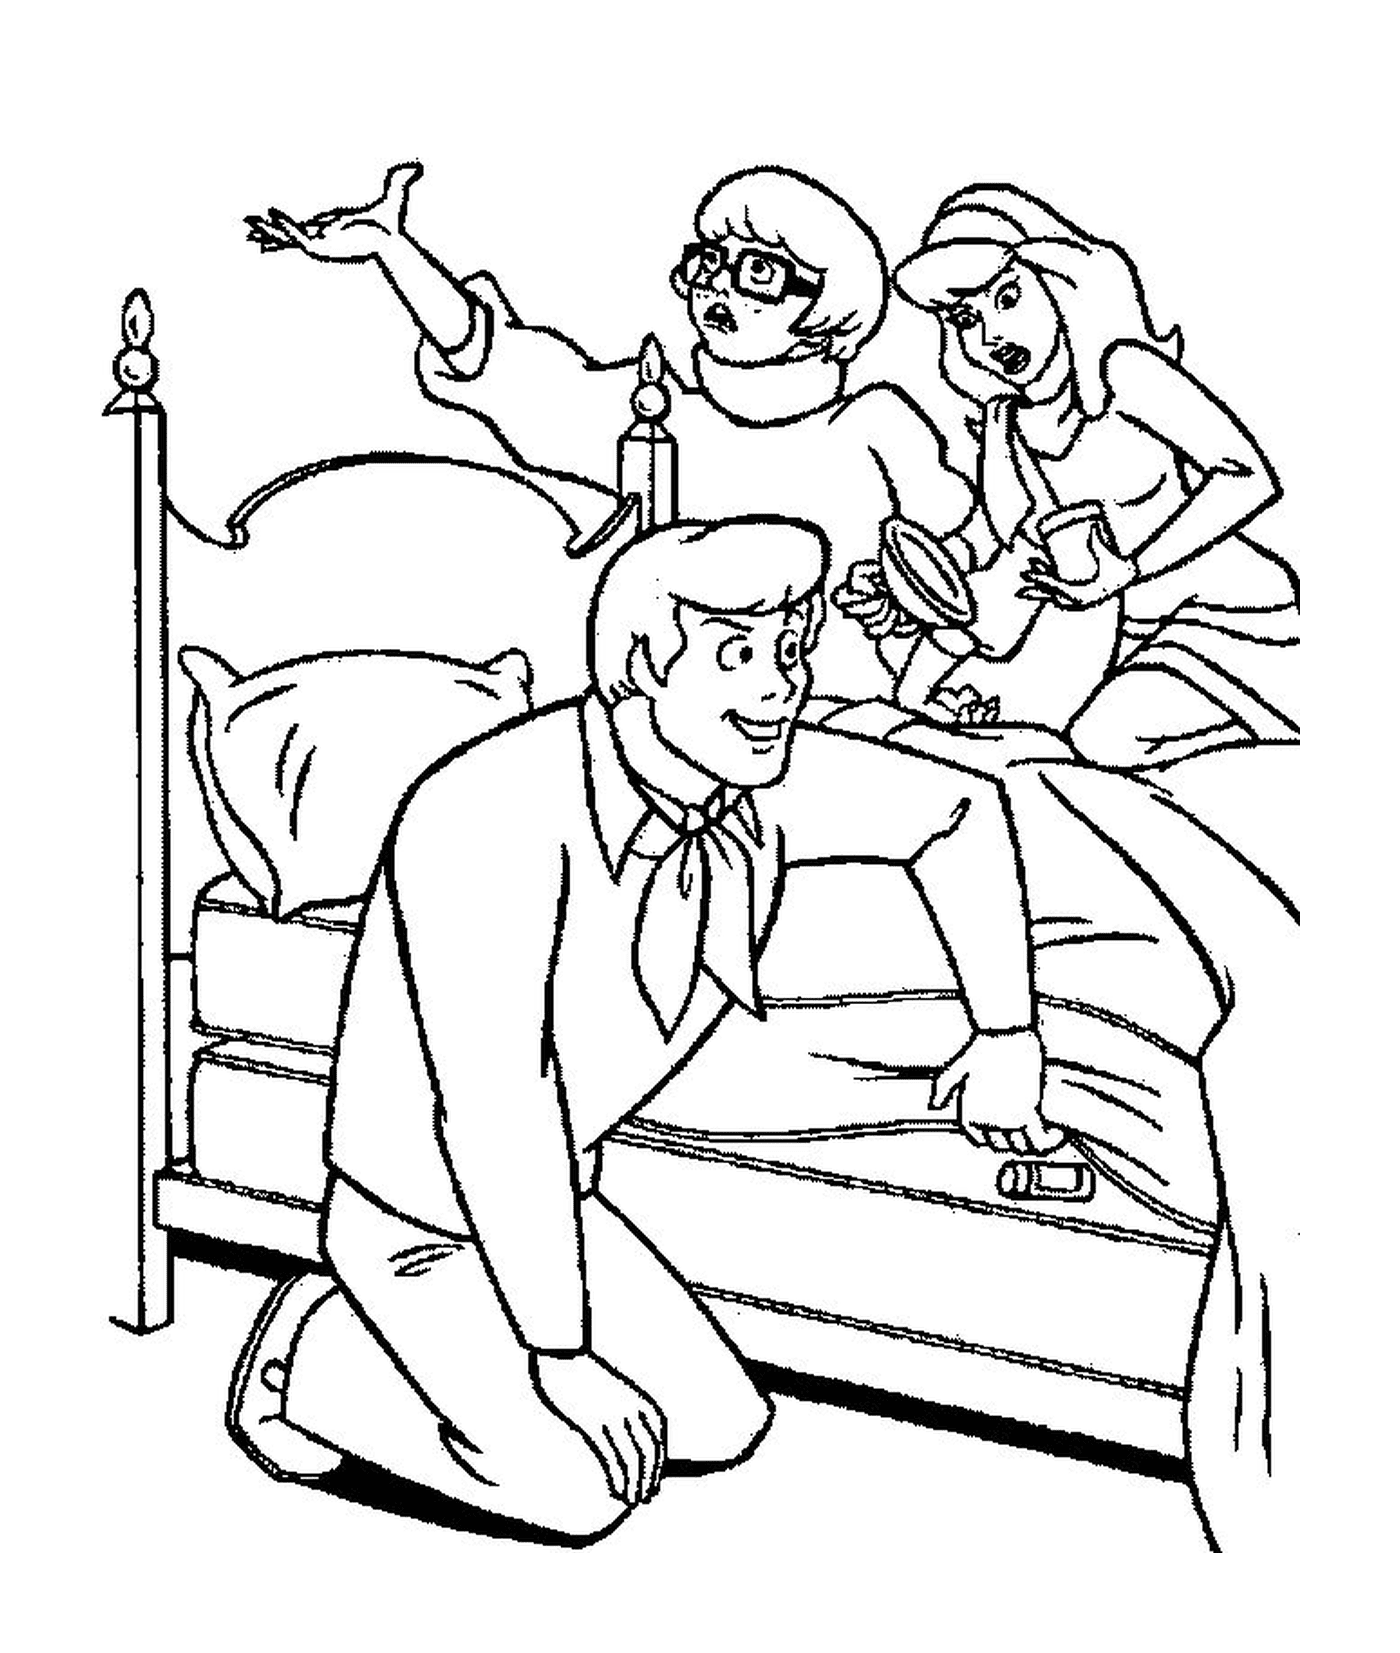  Fred finds a clue under the mattress on the bed 